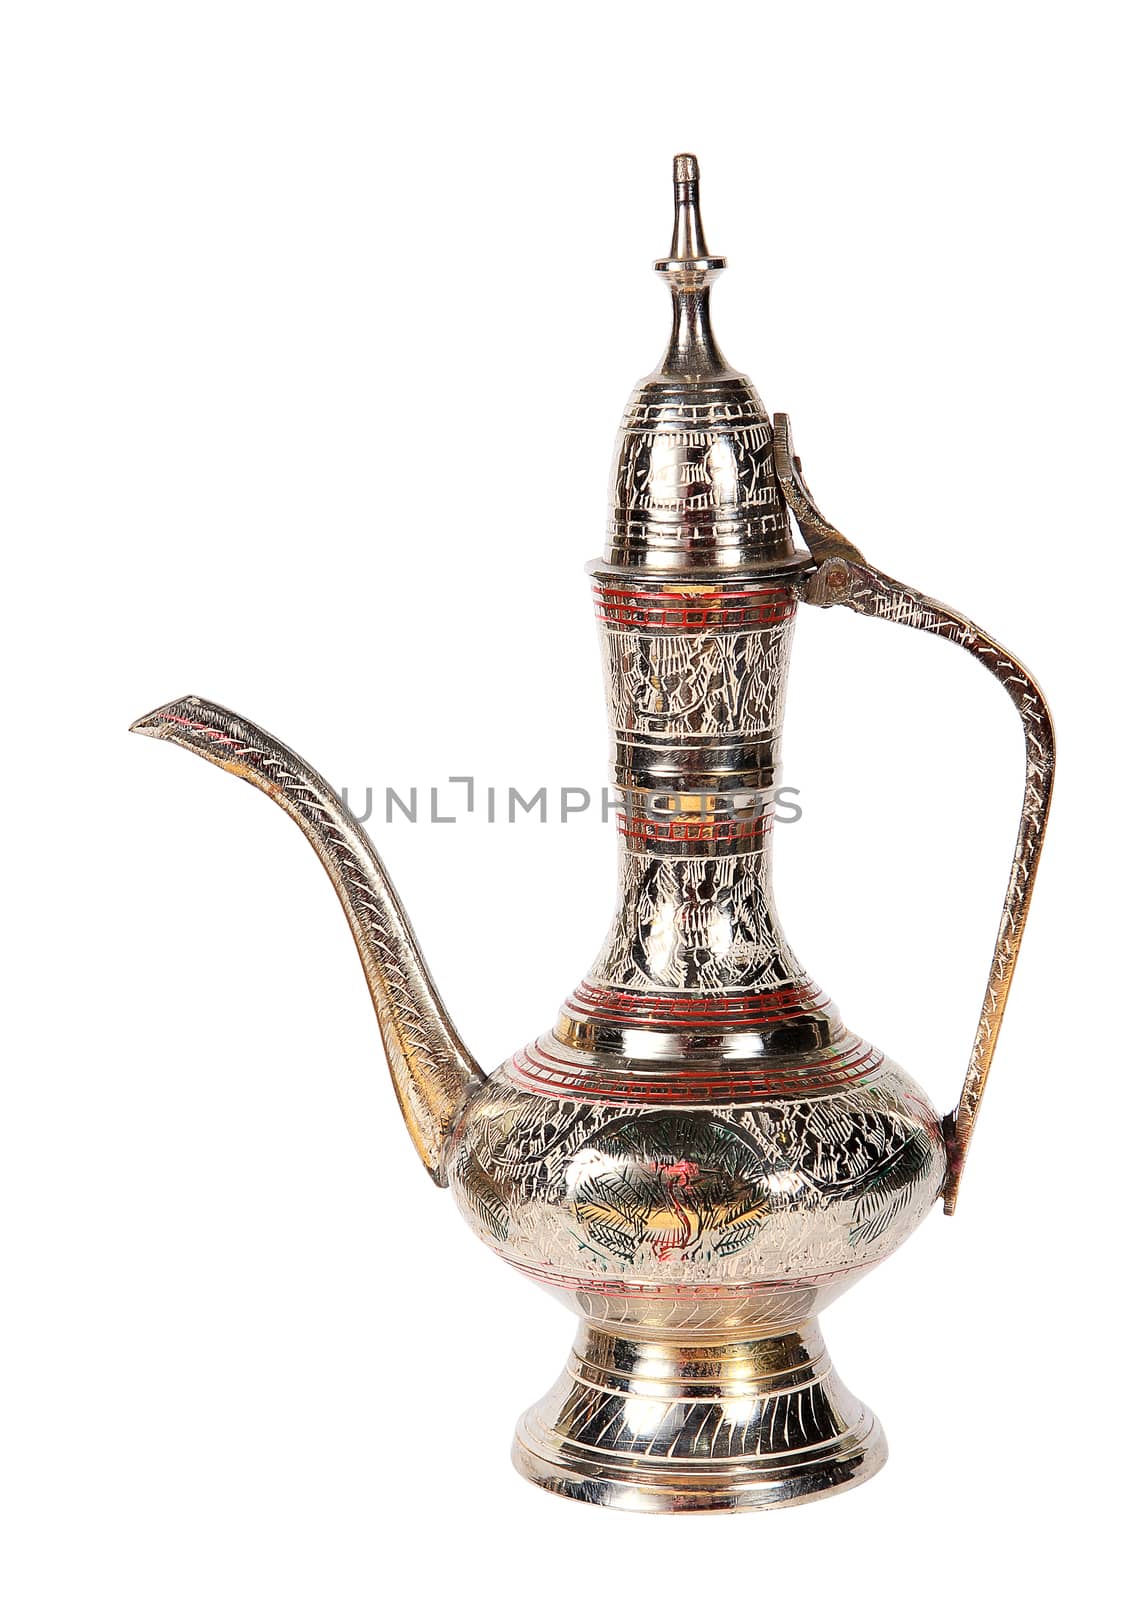 Indian old metal teapot on a white background (Surahi)